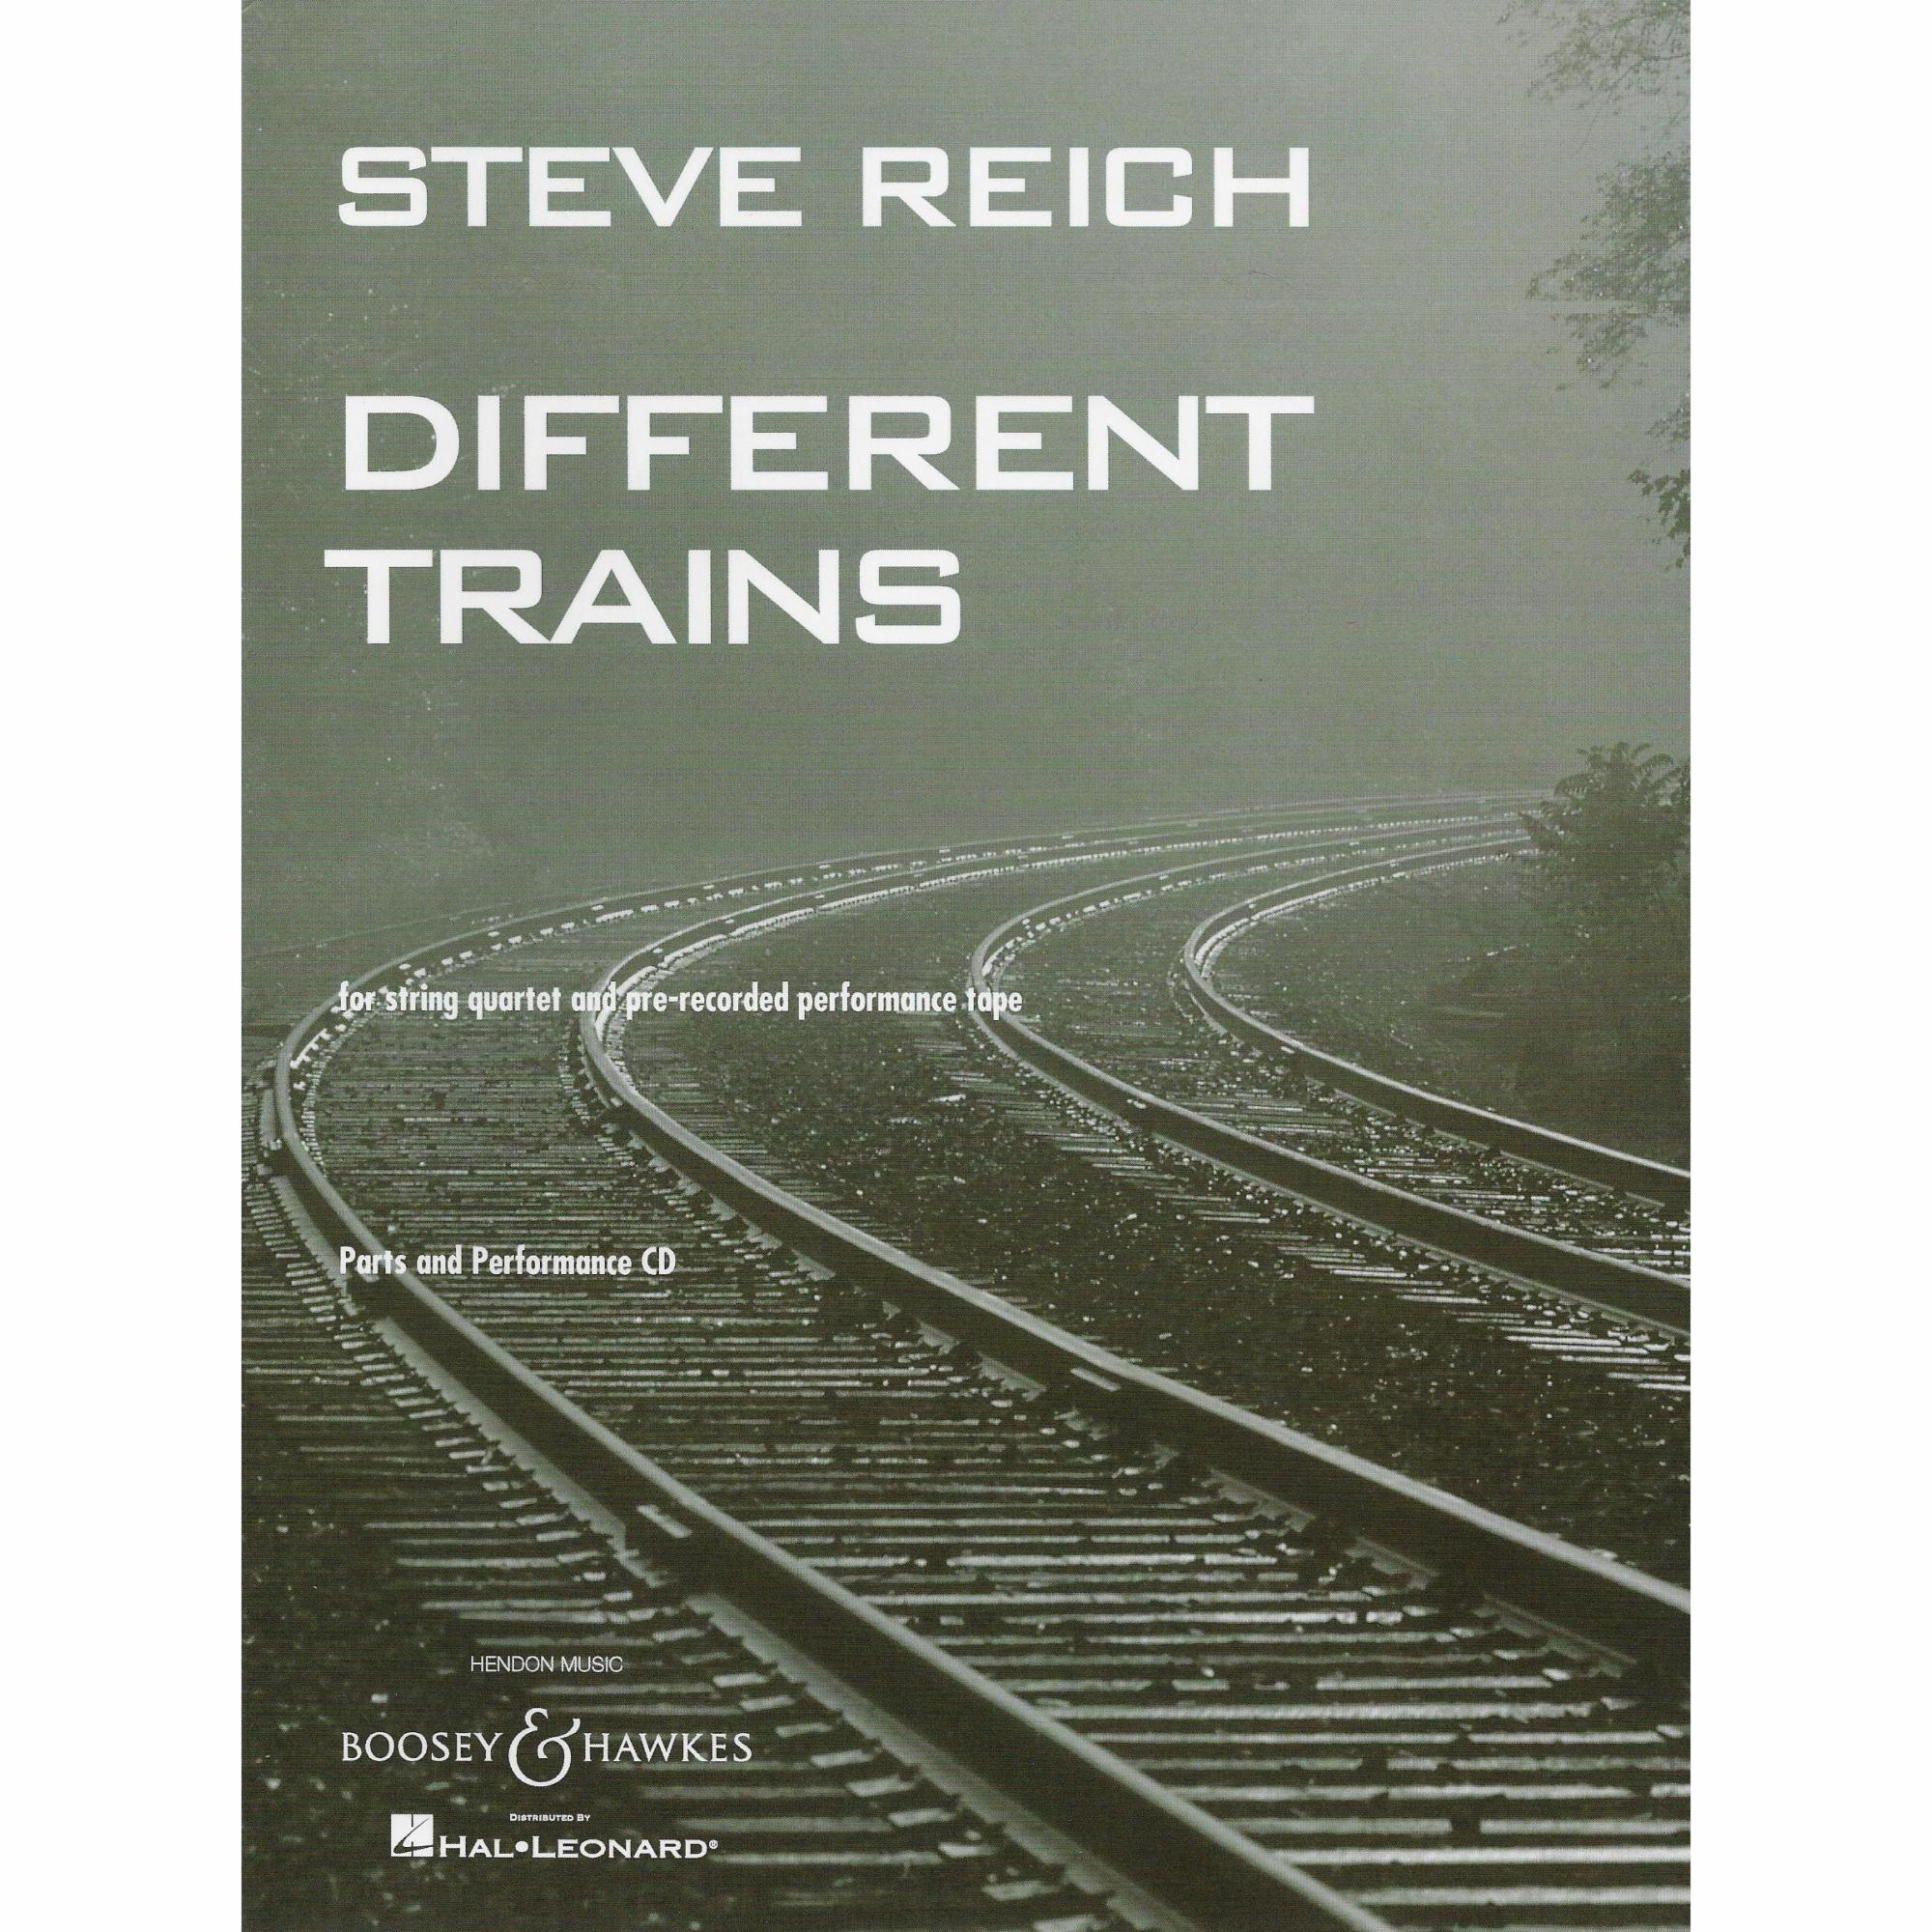 Reich -- Different Trains for String Quartet and Pre-Recorded Tape